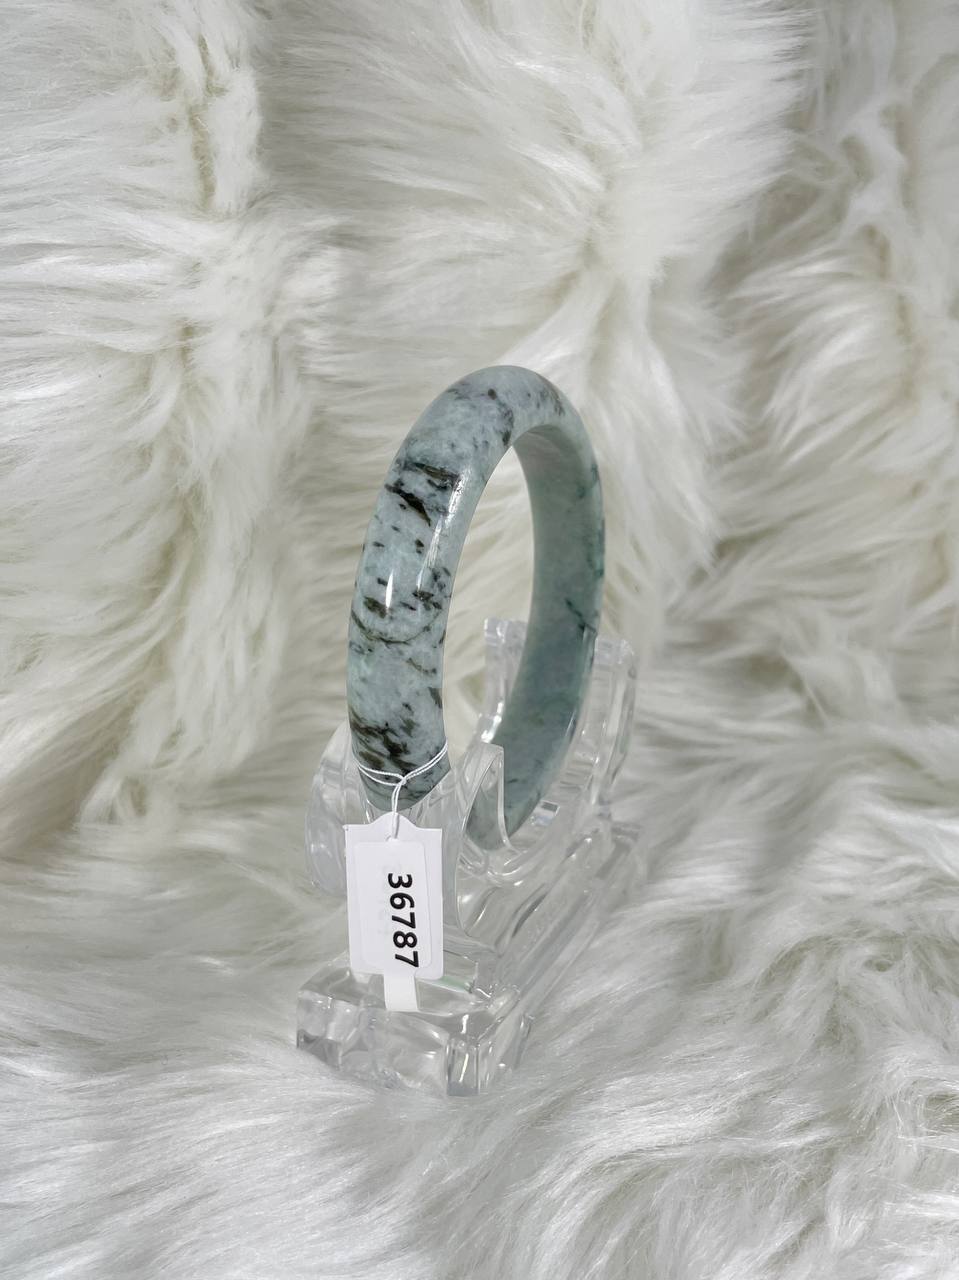 Grade A Natural Jade Bangle with certificate #36787